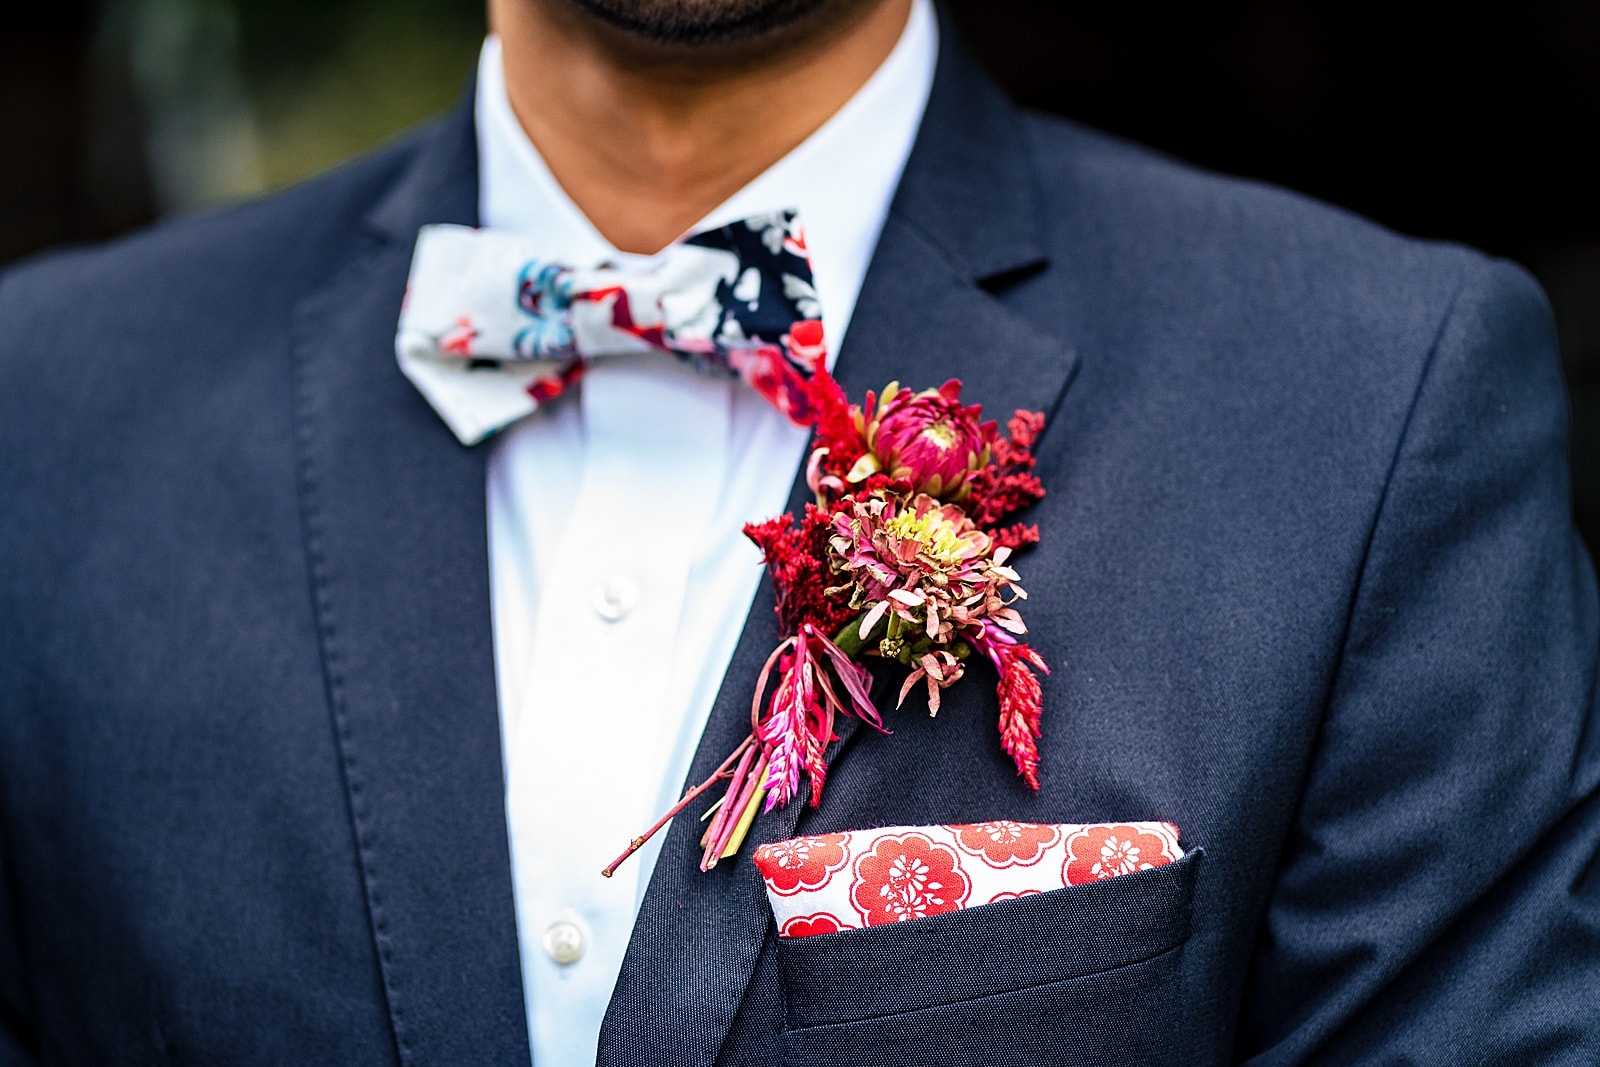 wedding style inspiration - colorful florals and patterns